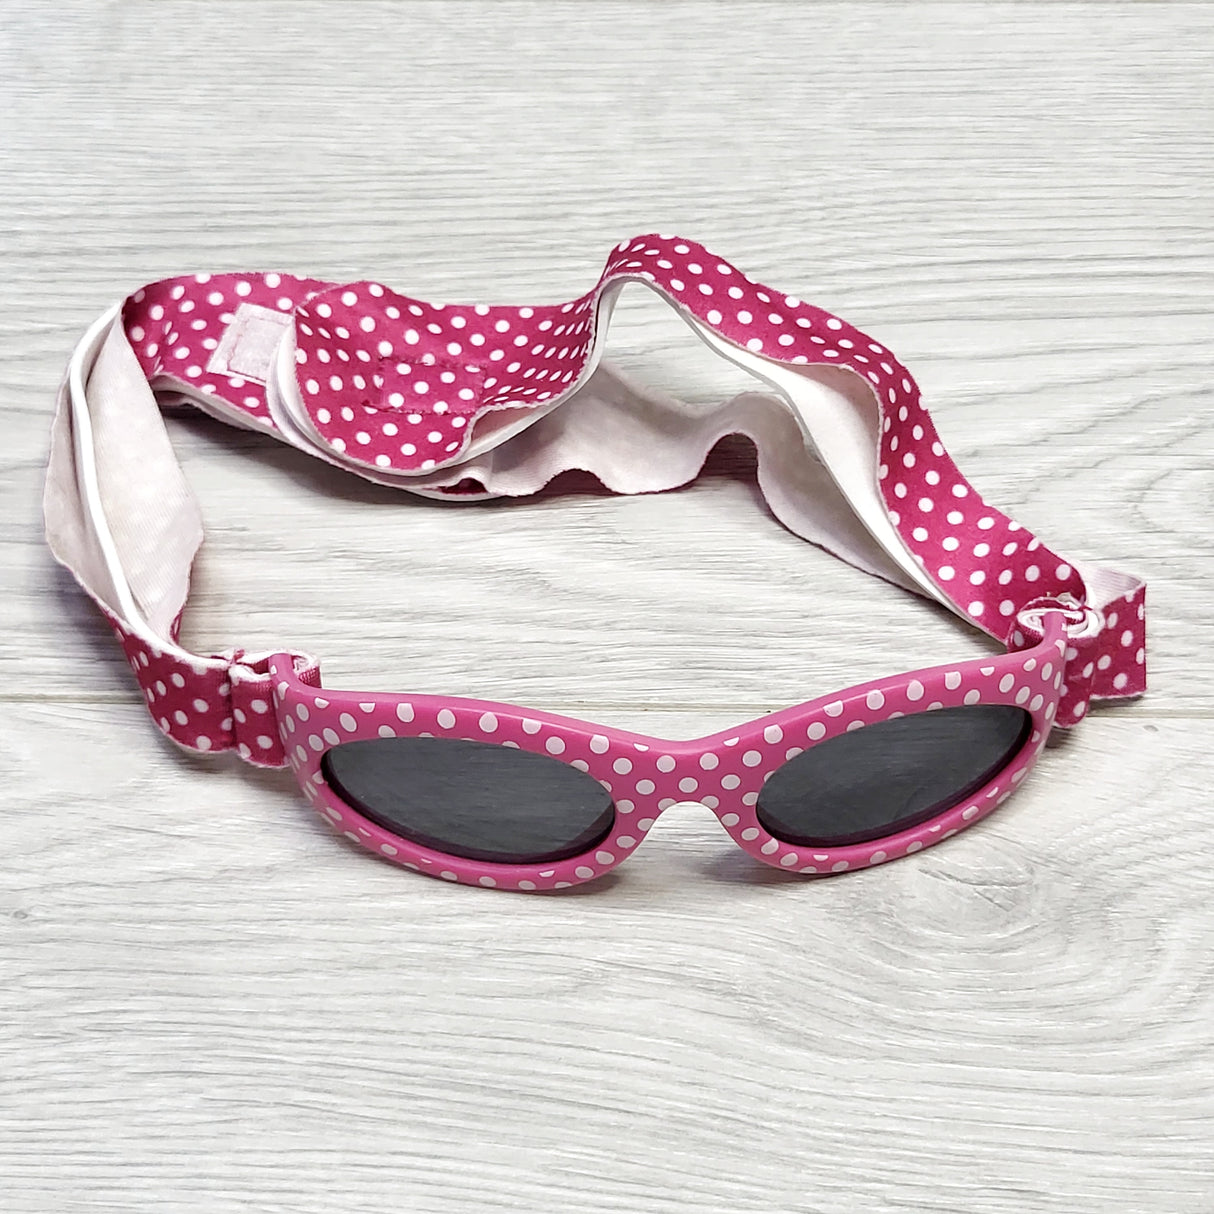 MSNDS11 - Baby sunglasses with strap